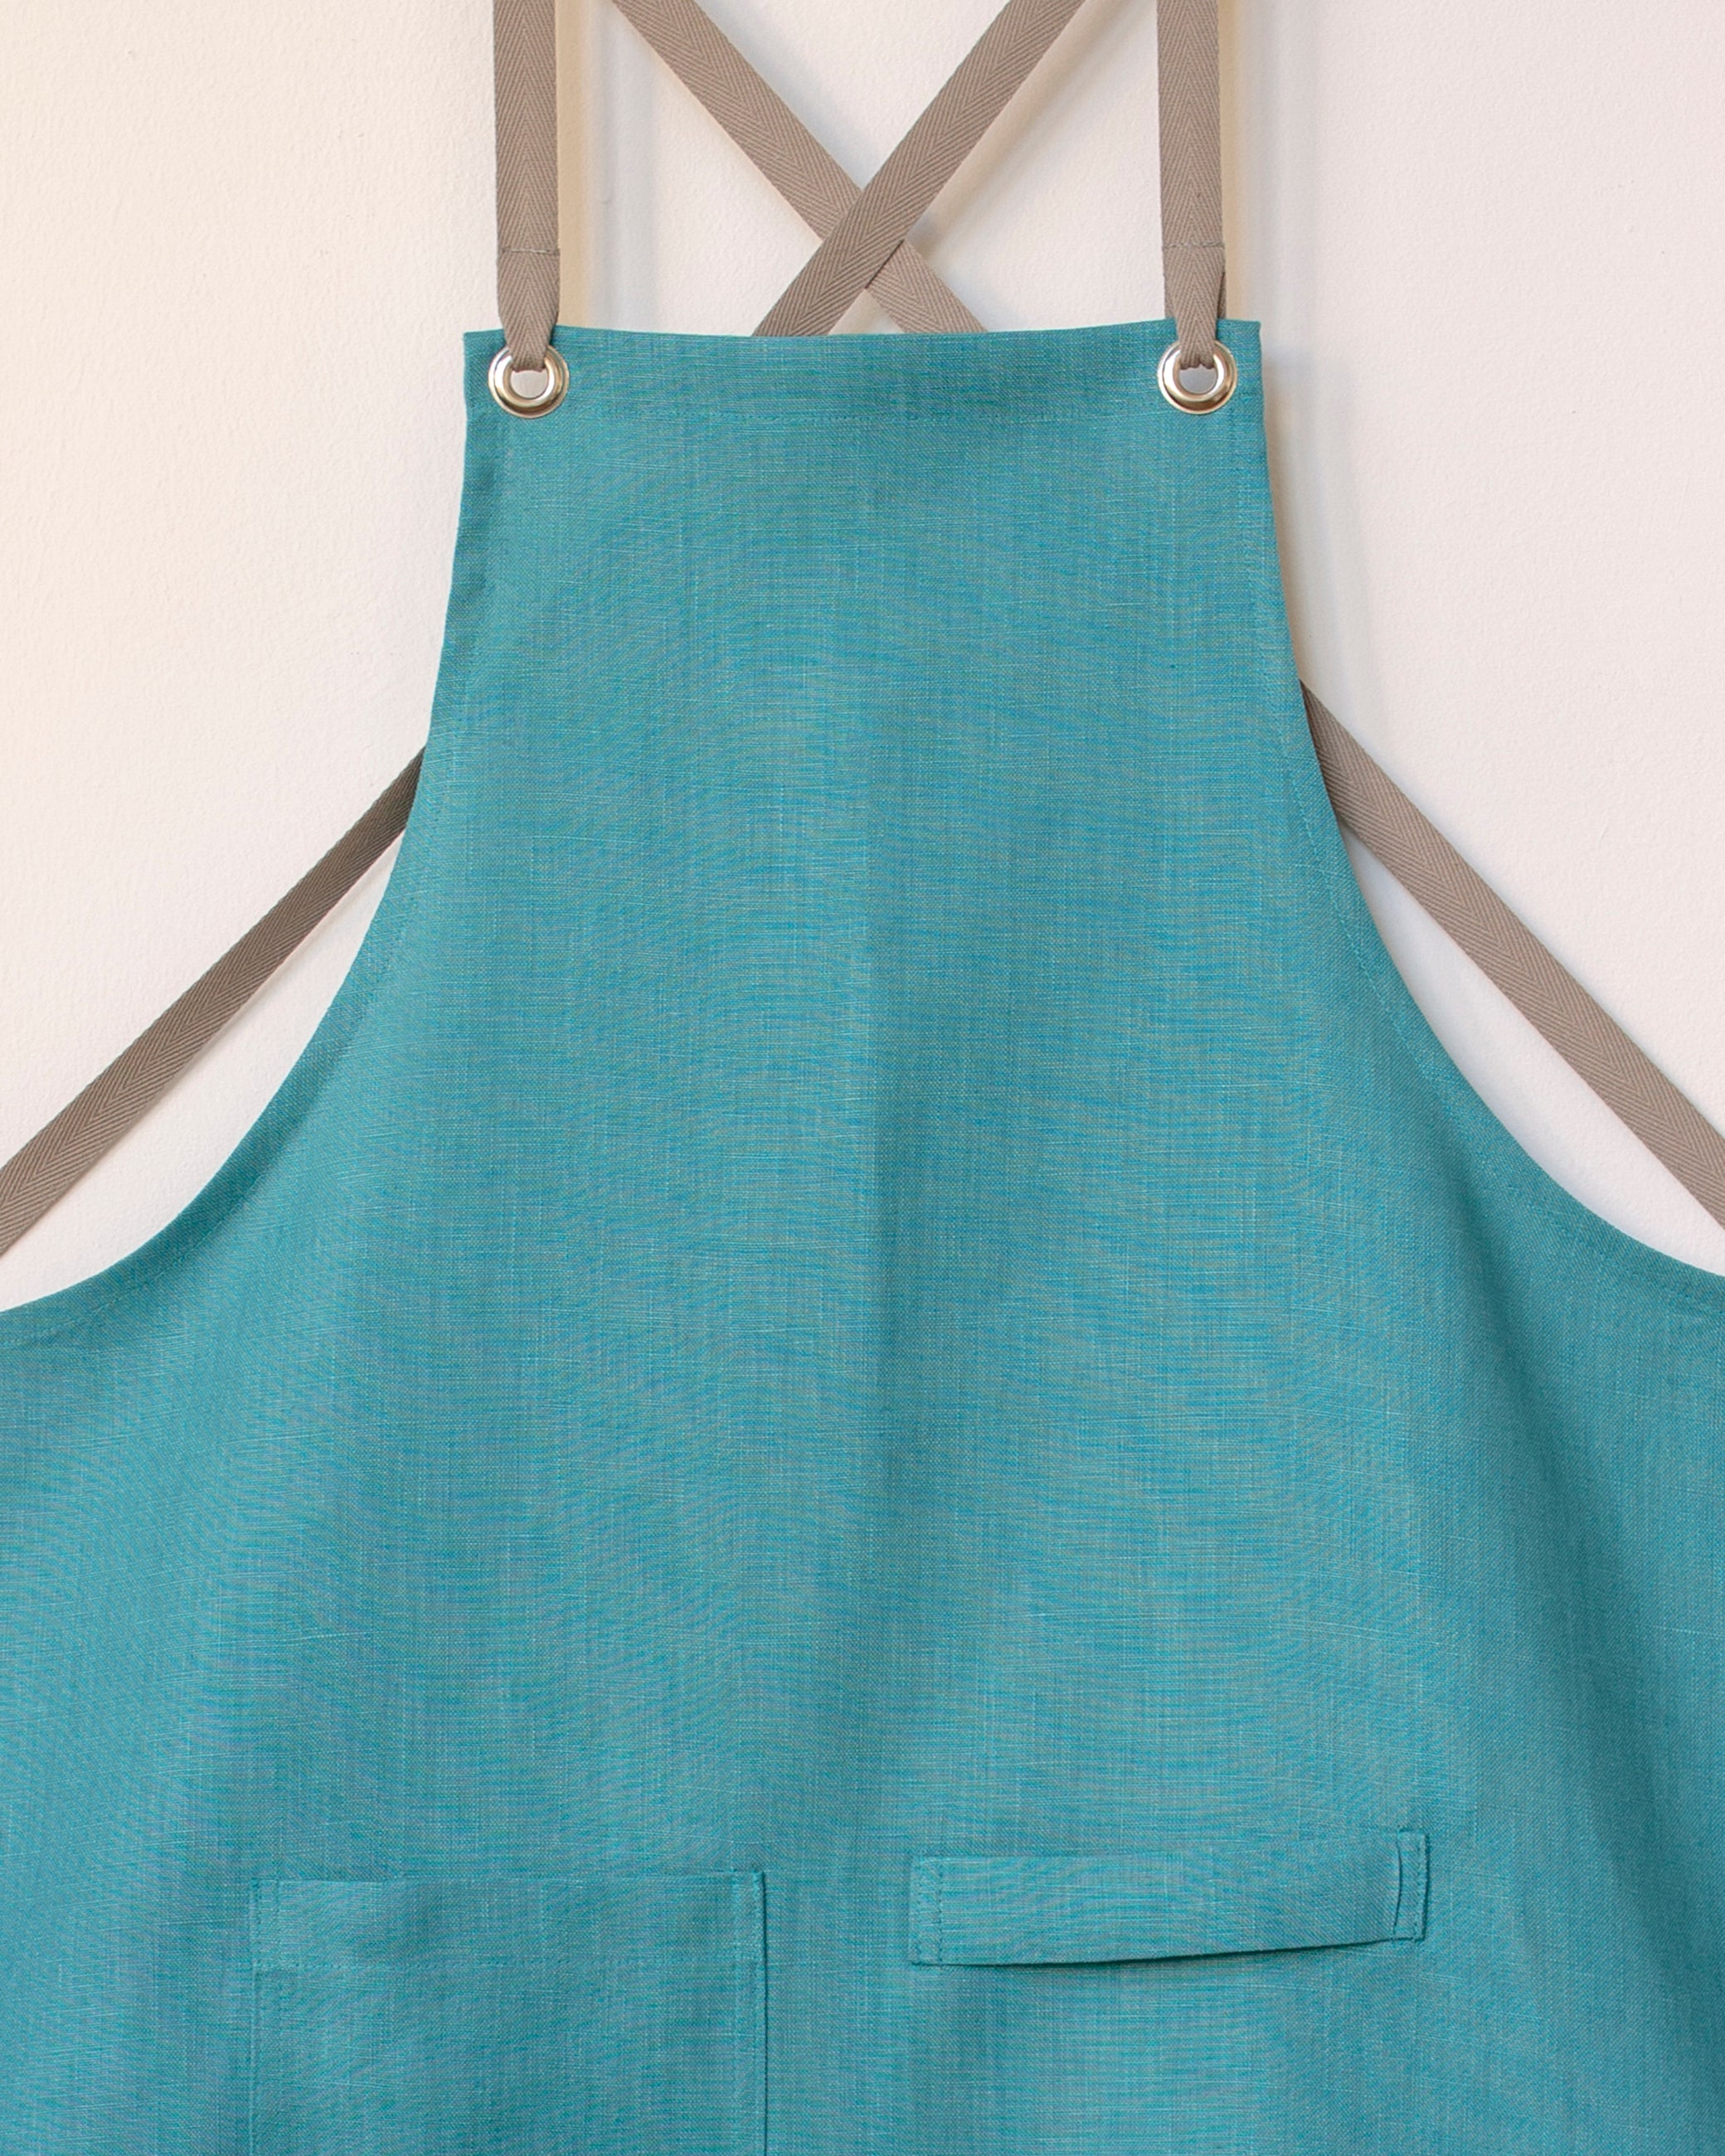 Studiopatró Cross-Back Apron, 100% Linen with Cotton Ties, 1 Size Fits Most  on Food52